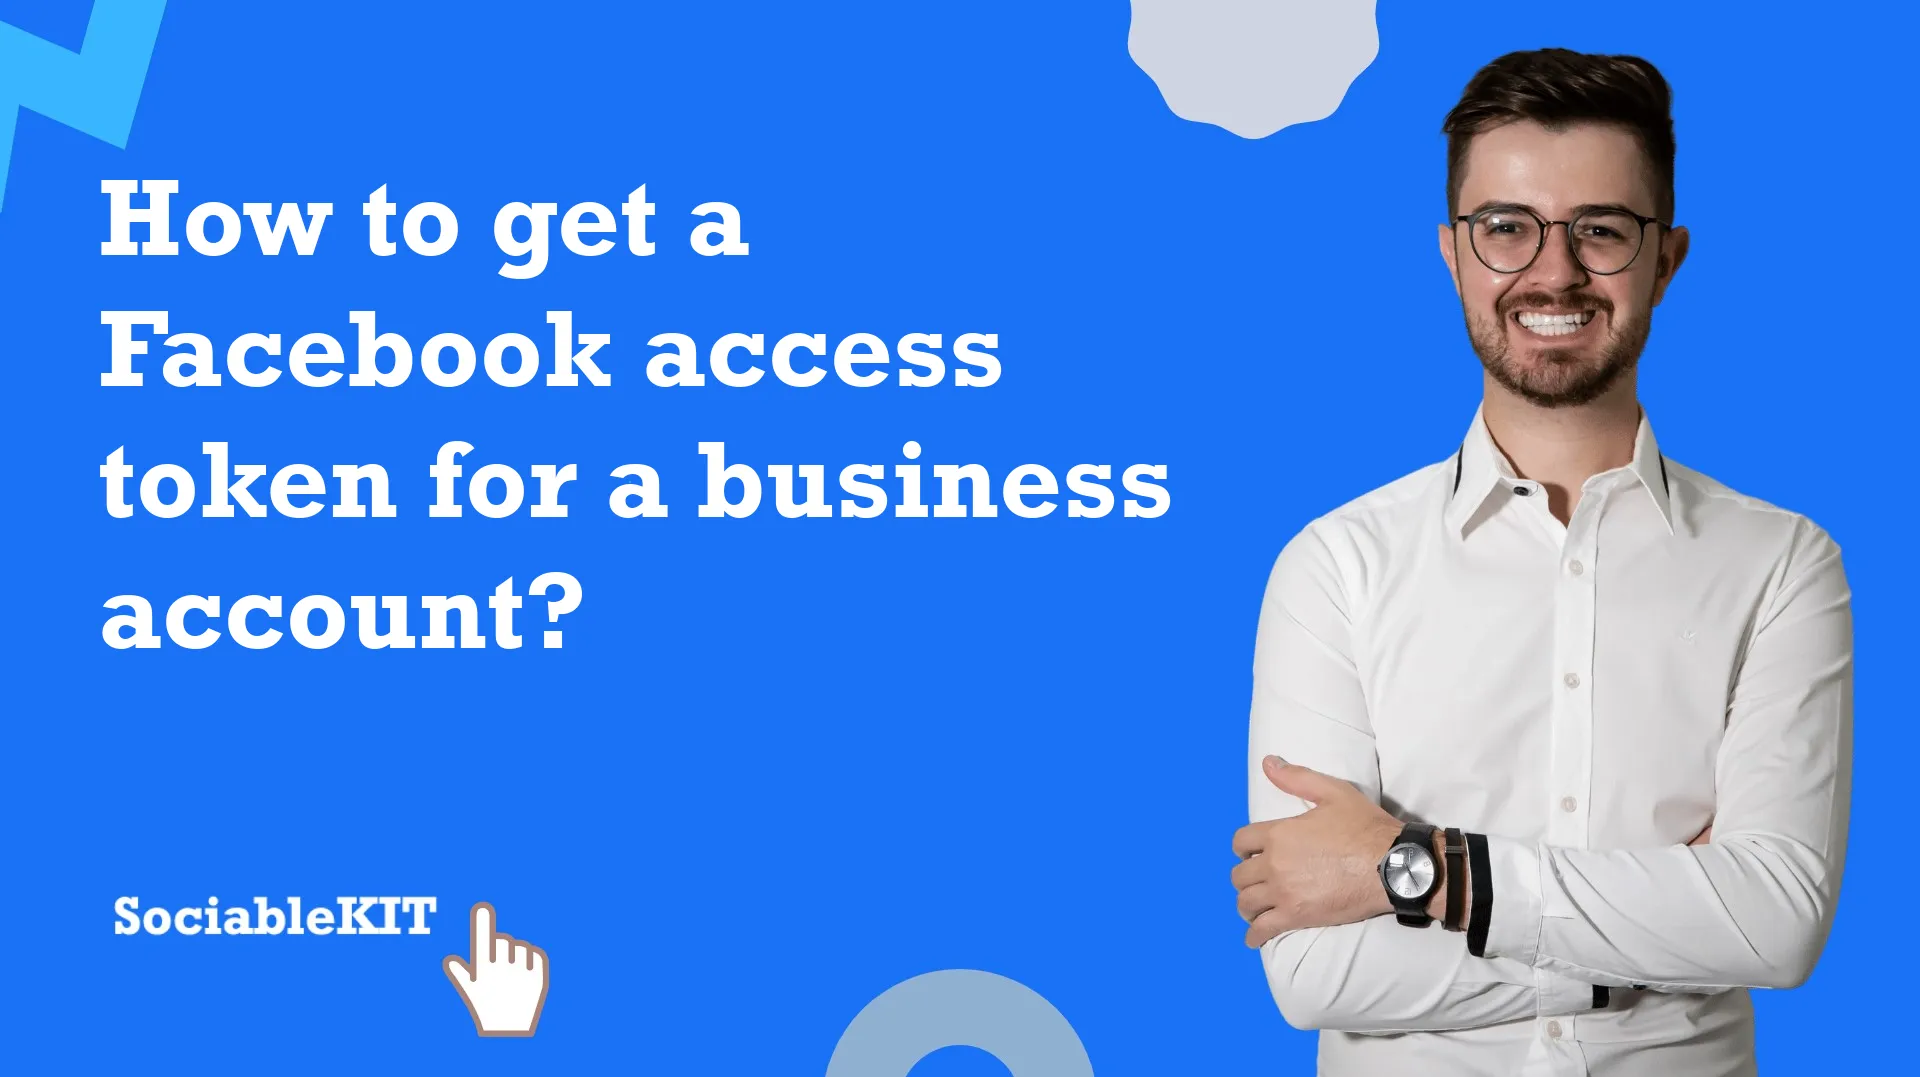 How to get a Facebook access token for a business account?